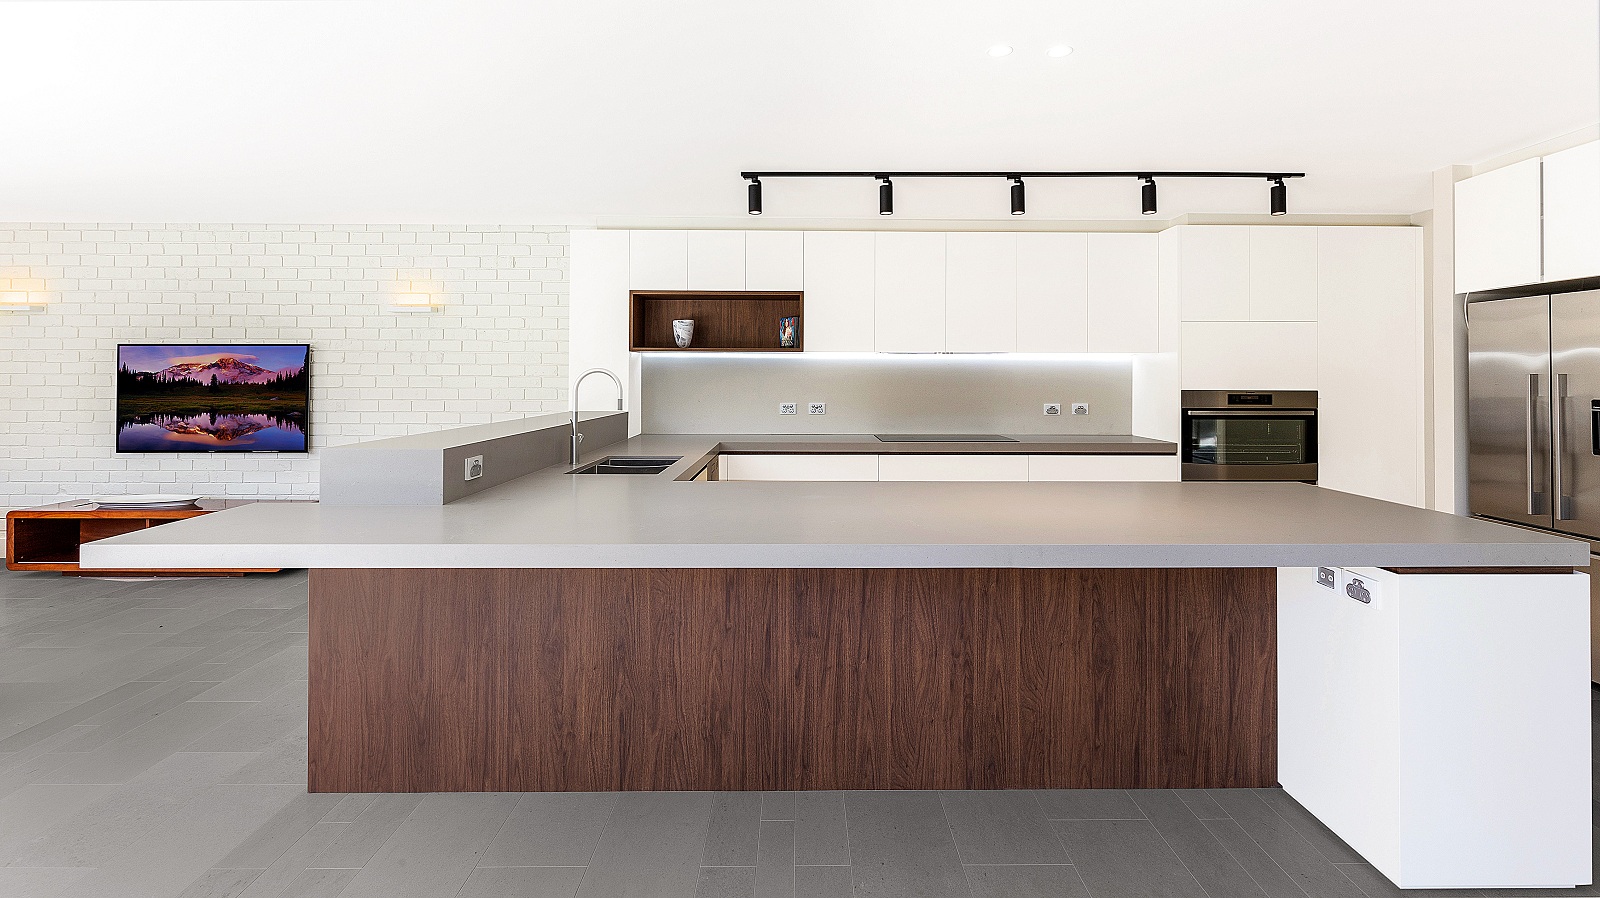 Dover Heights Kitchen, Polyurethane and Likewood Timber Grain kitchen with a sleek concrete Caesarstone bench.